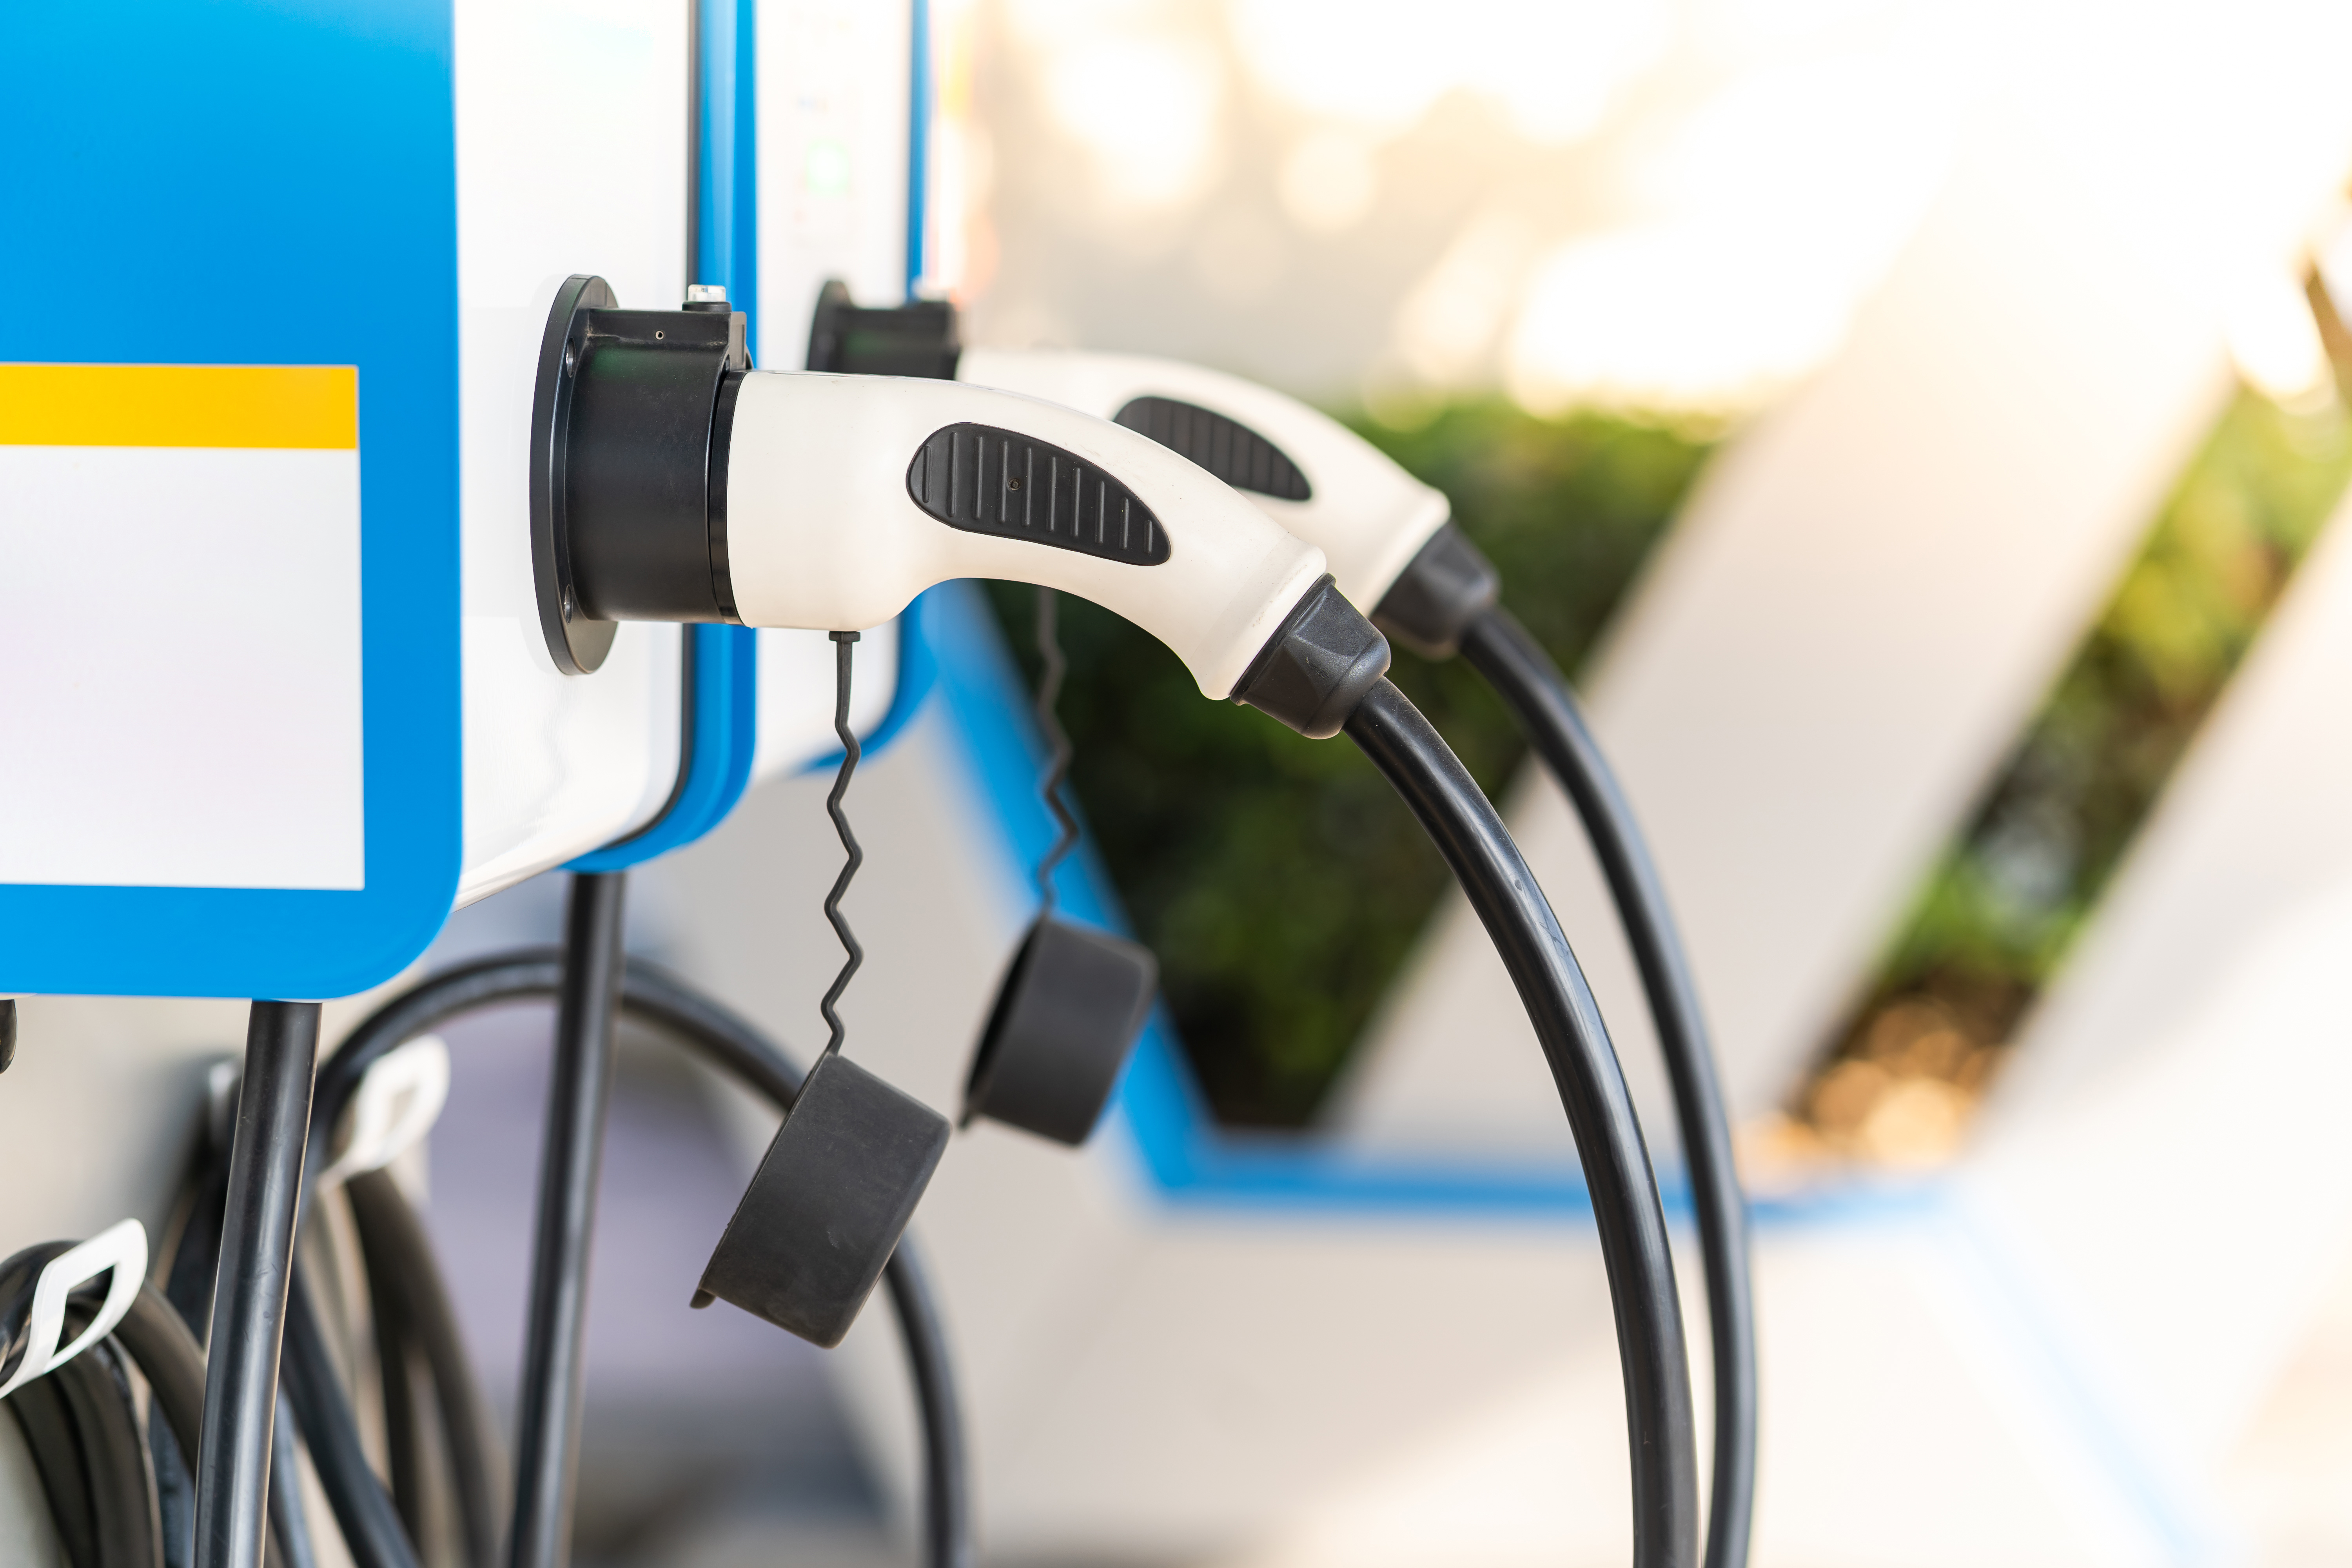 Forecasting Demand for Electric Vehicle Charging Infrastructure